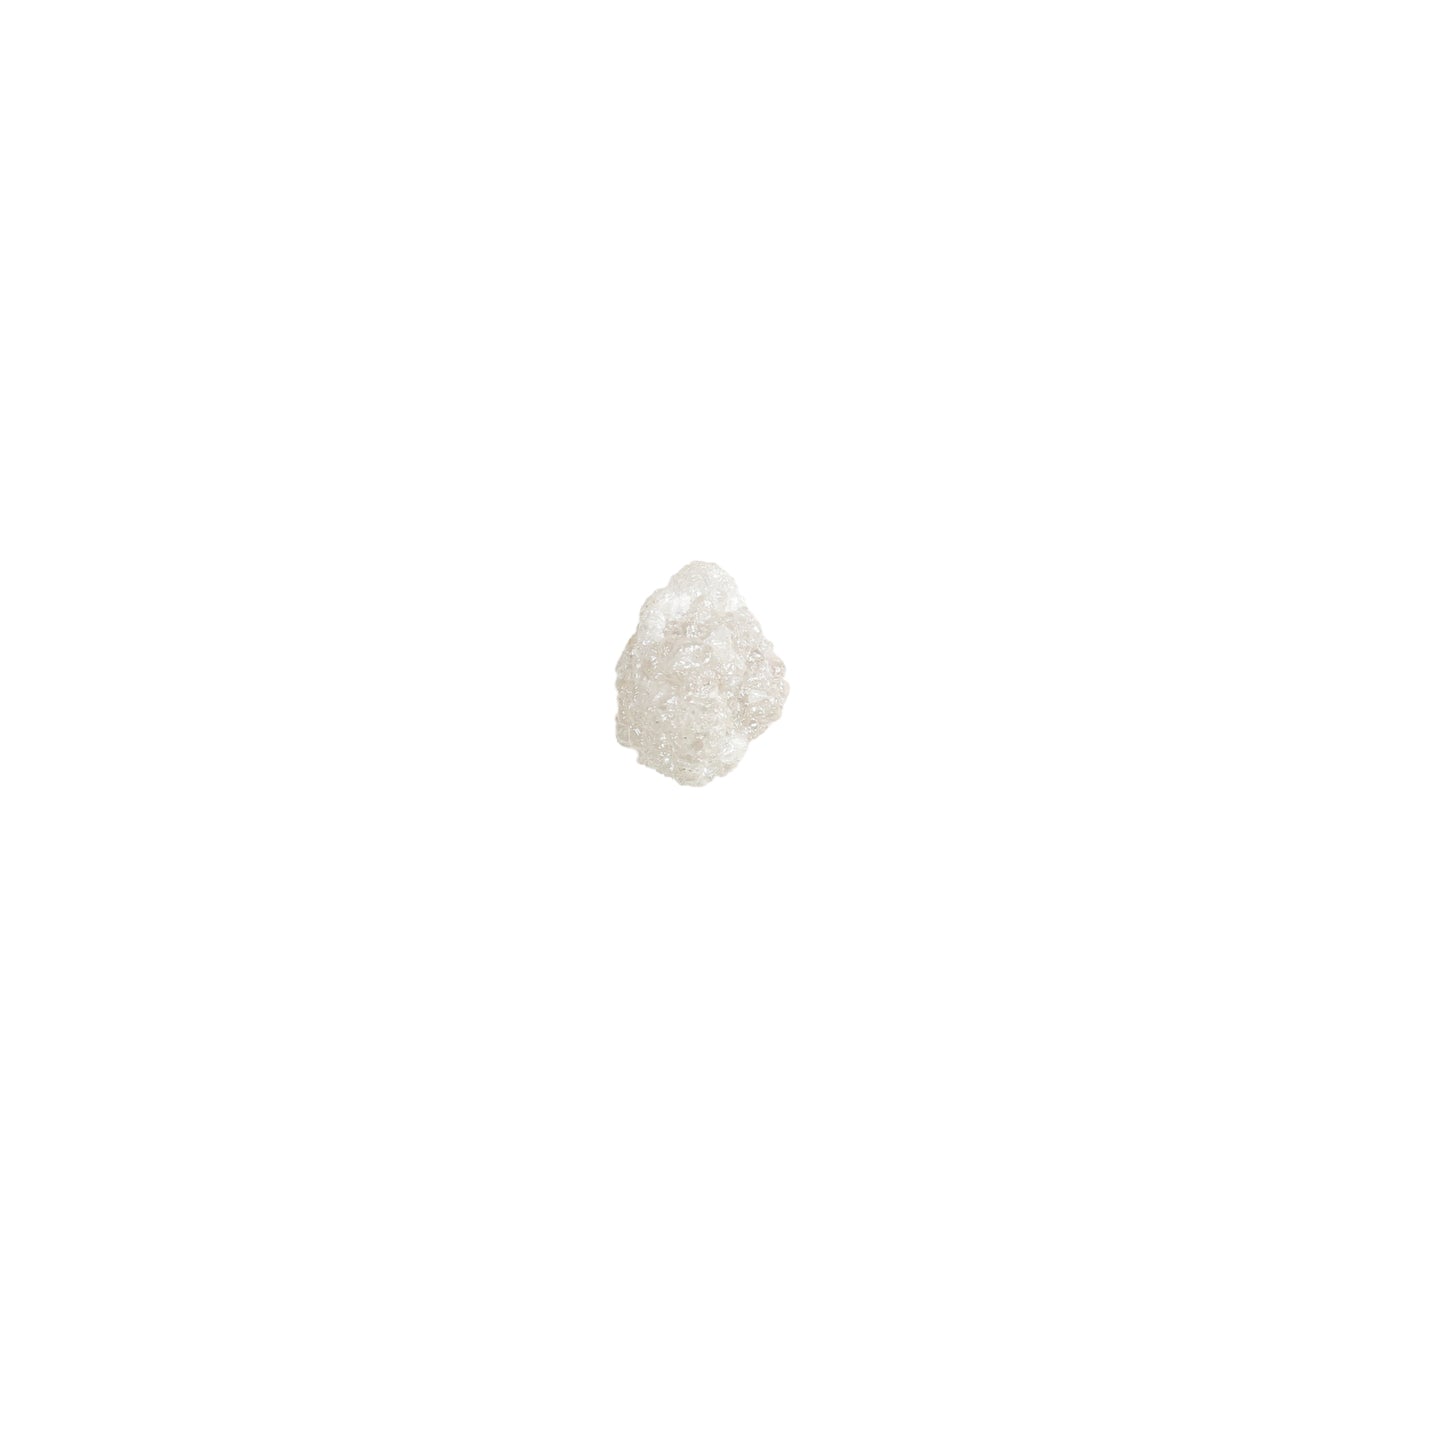 1.01 CT Beautiful Snow White Rough Uncut Diamond For Pendant | Gift For Mother | Gift For Wife